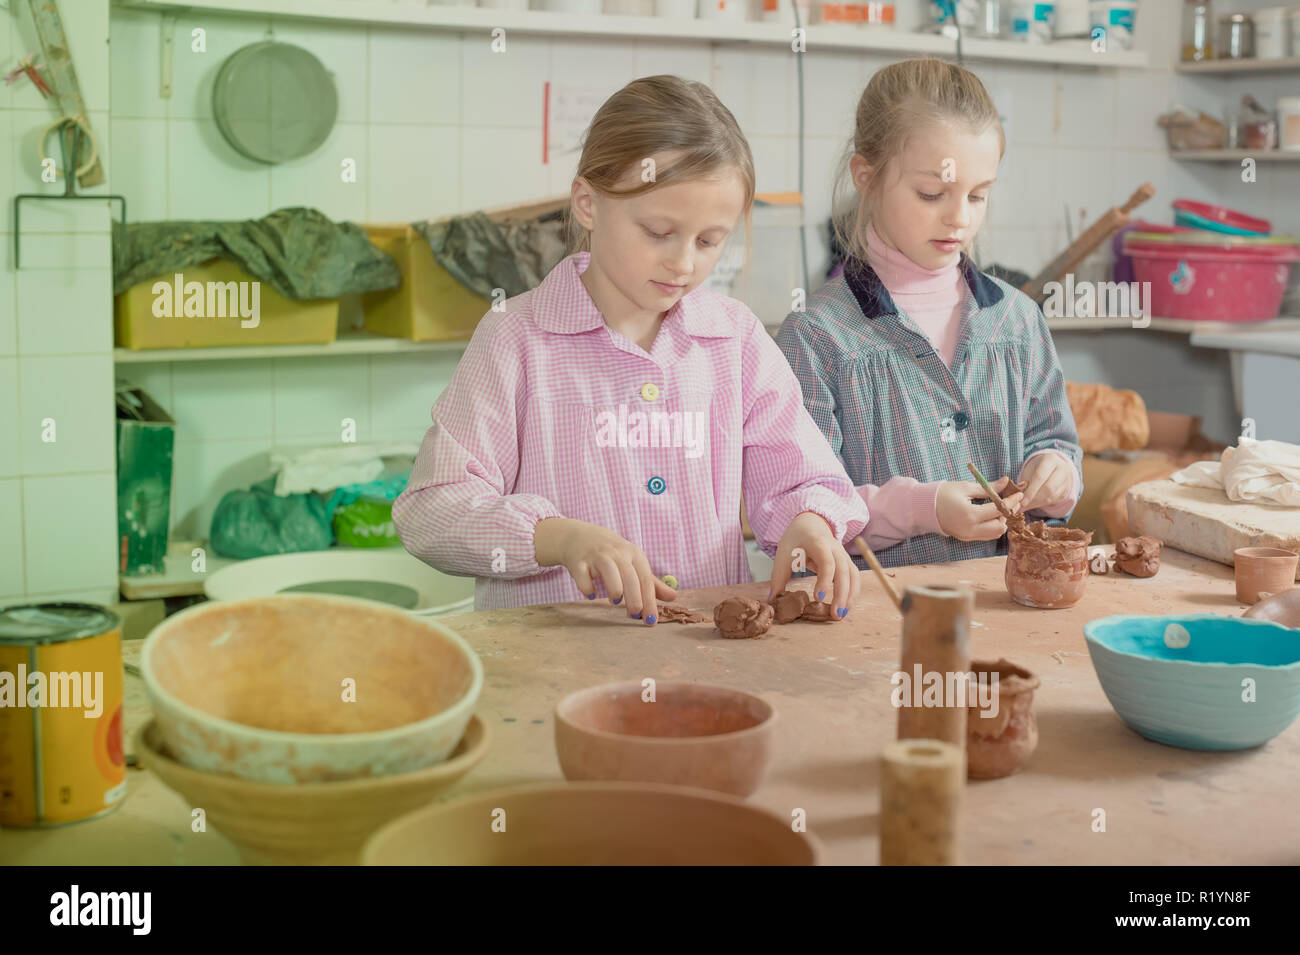 Smiling schoolgirls learning to make ceramics during arts and crafts class Stock Photo